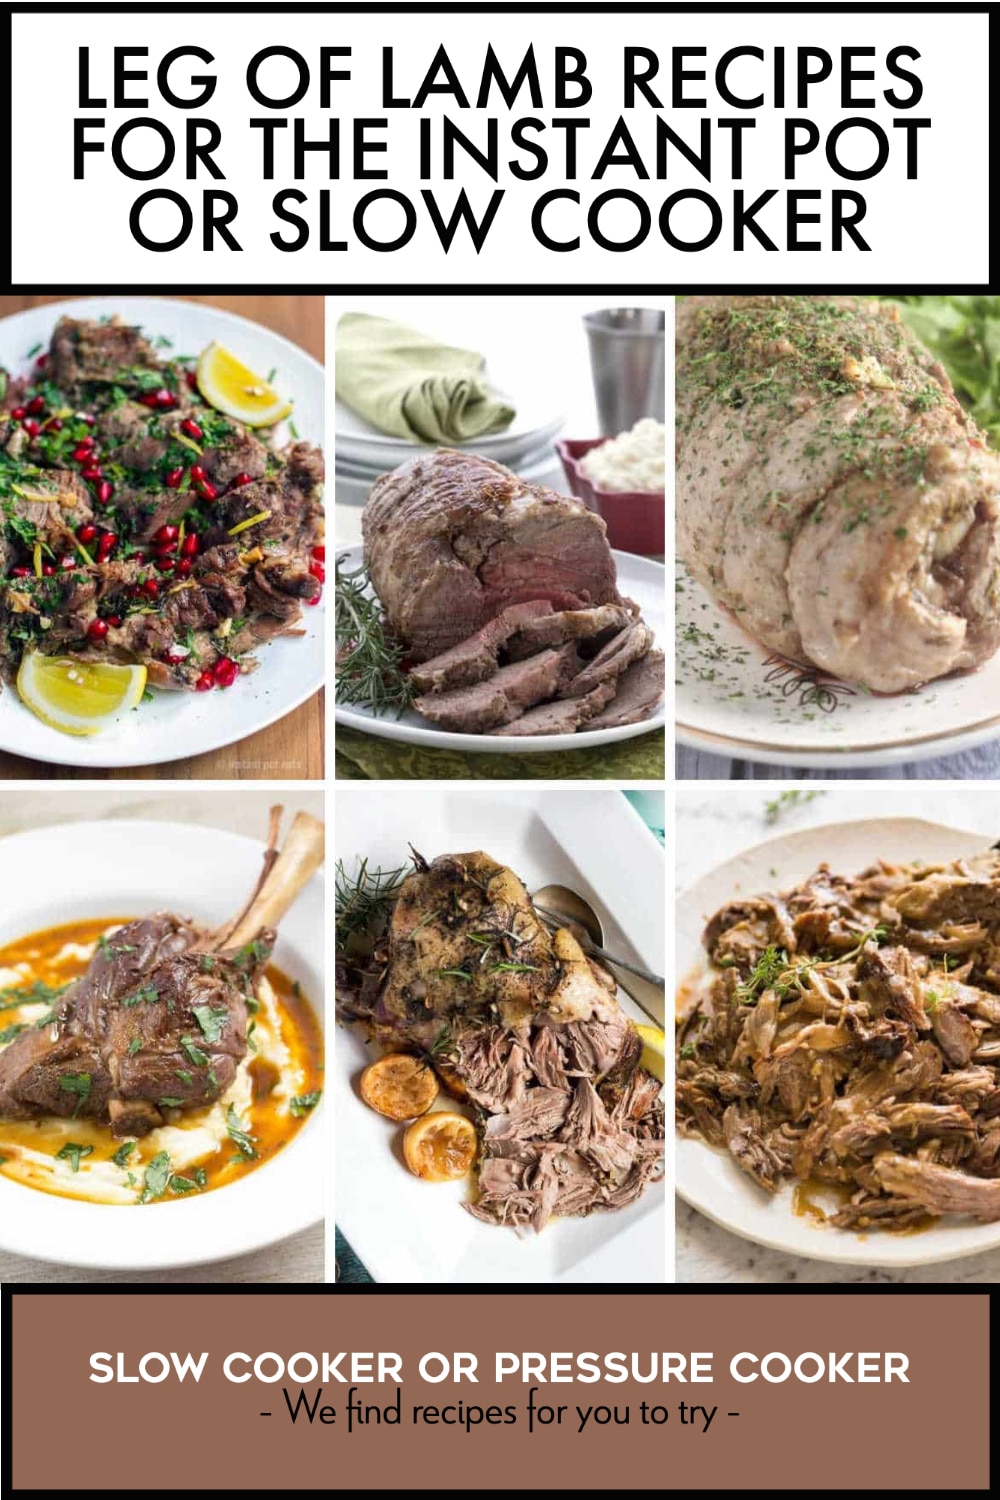 Pinterest image of Leg of Lamb Recipes for the Instant Pot or Slow Cooker